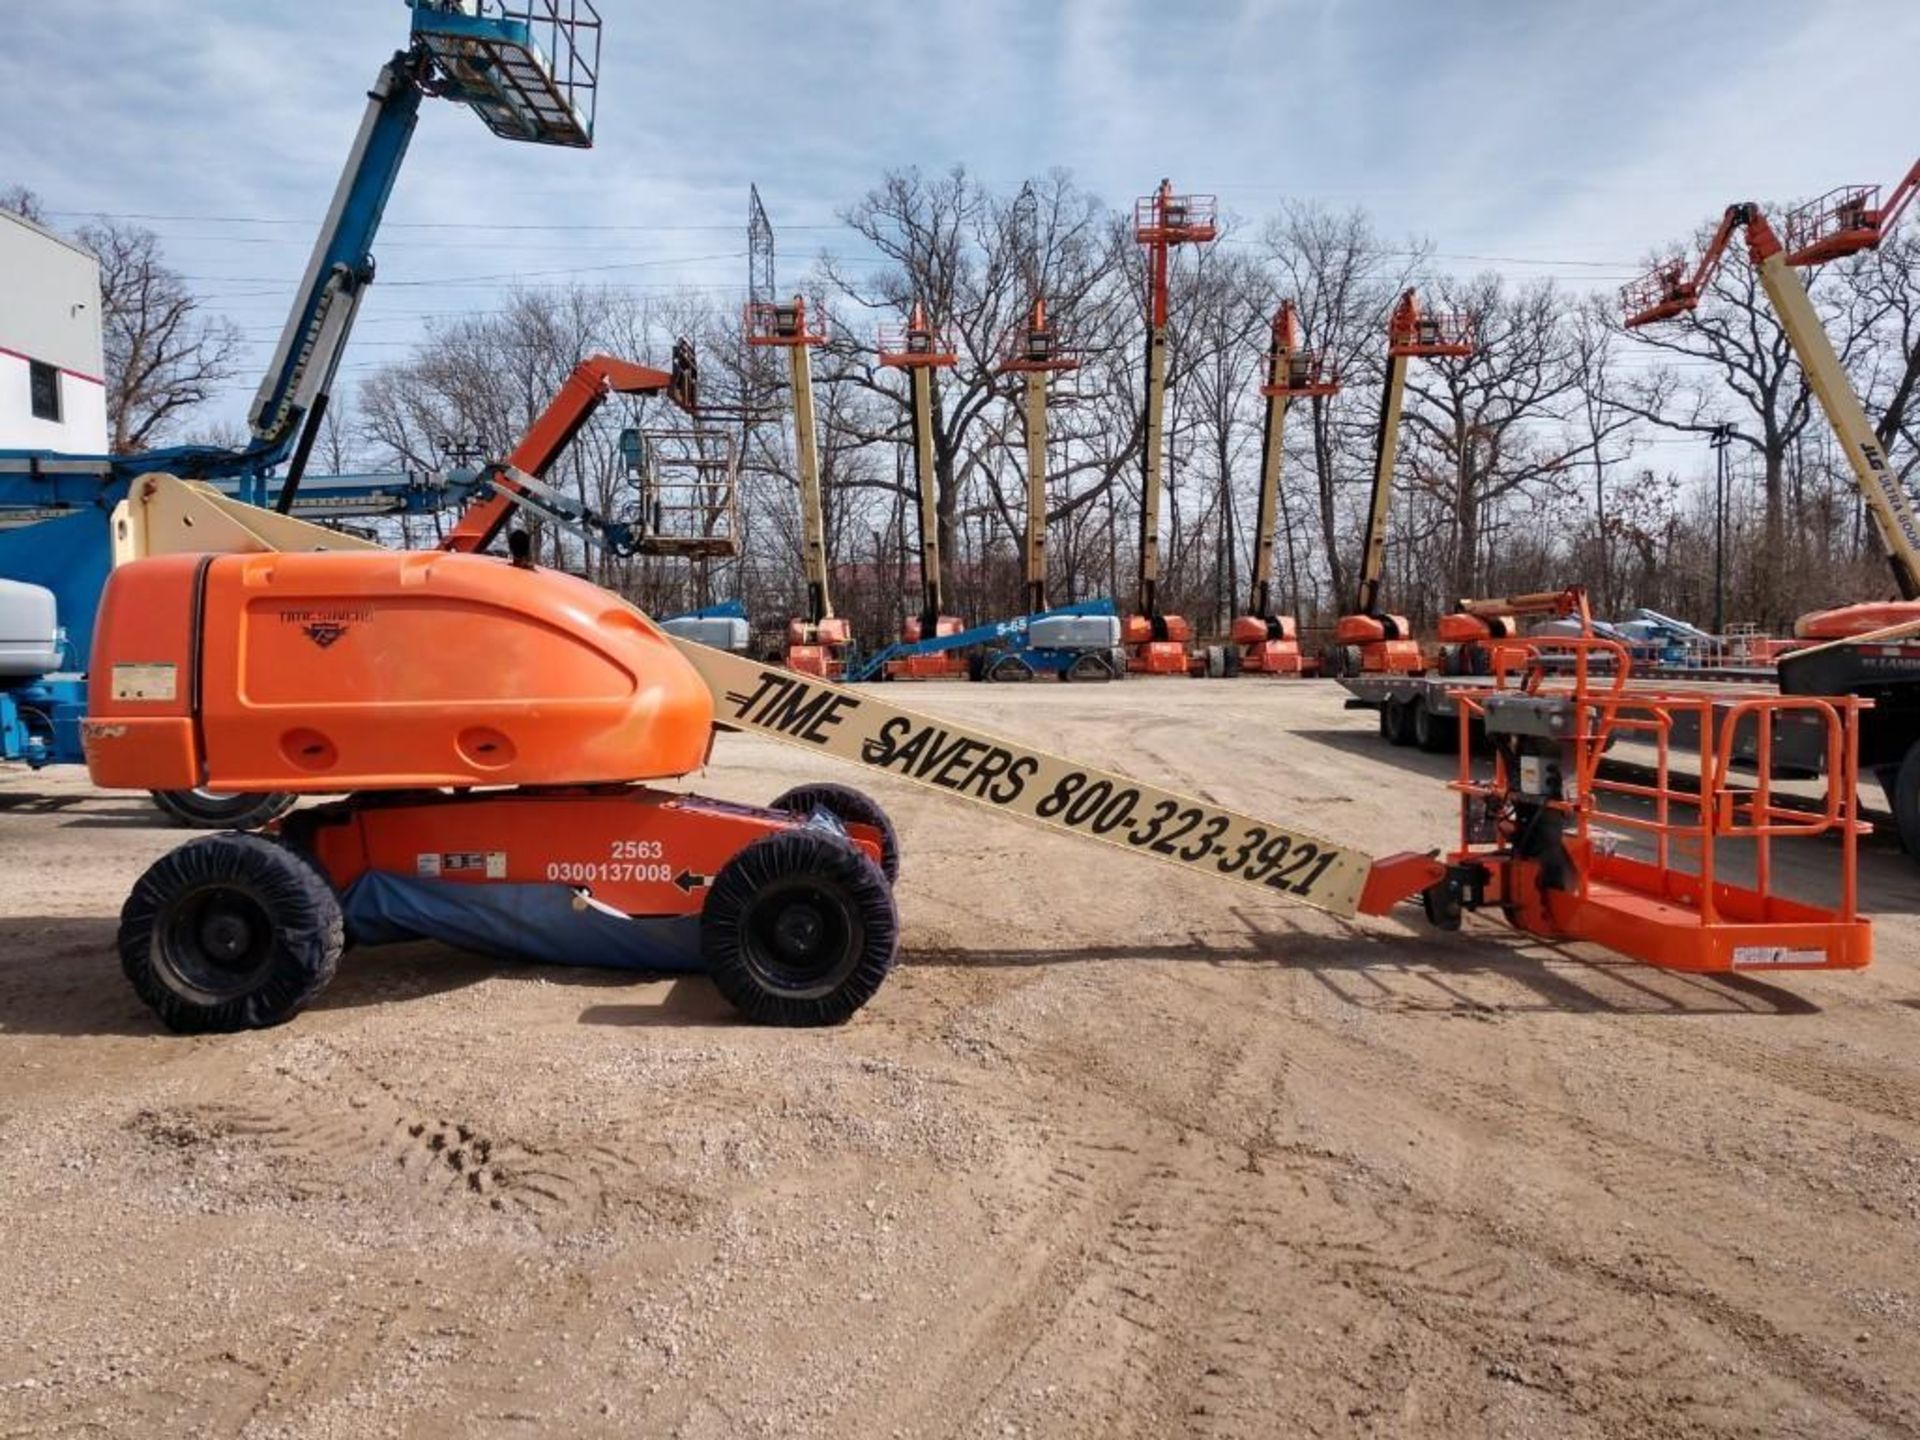 JLG 400S Rough Terrain Articulating Boom Lift (S/N 300137008, Year 2009), with 40' Platform